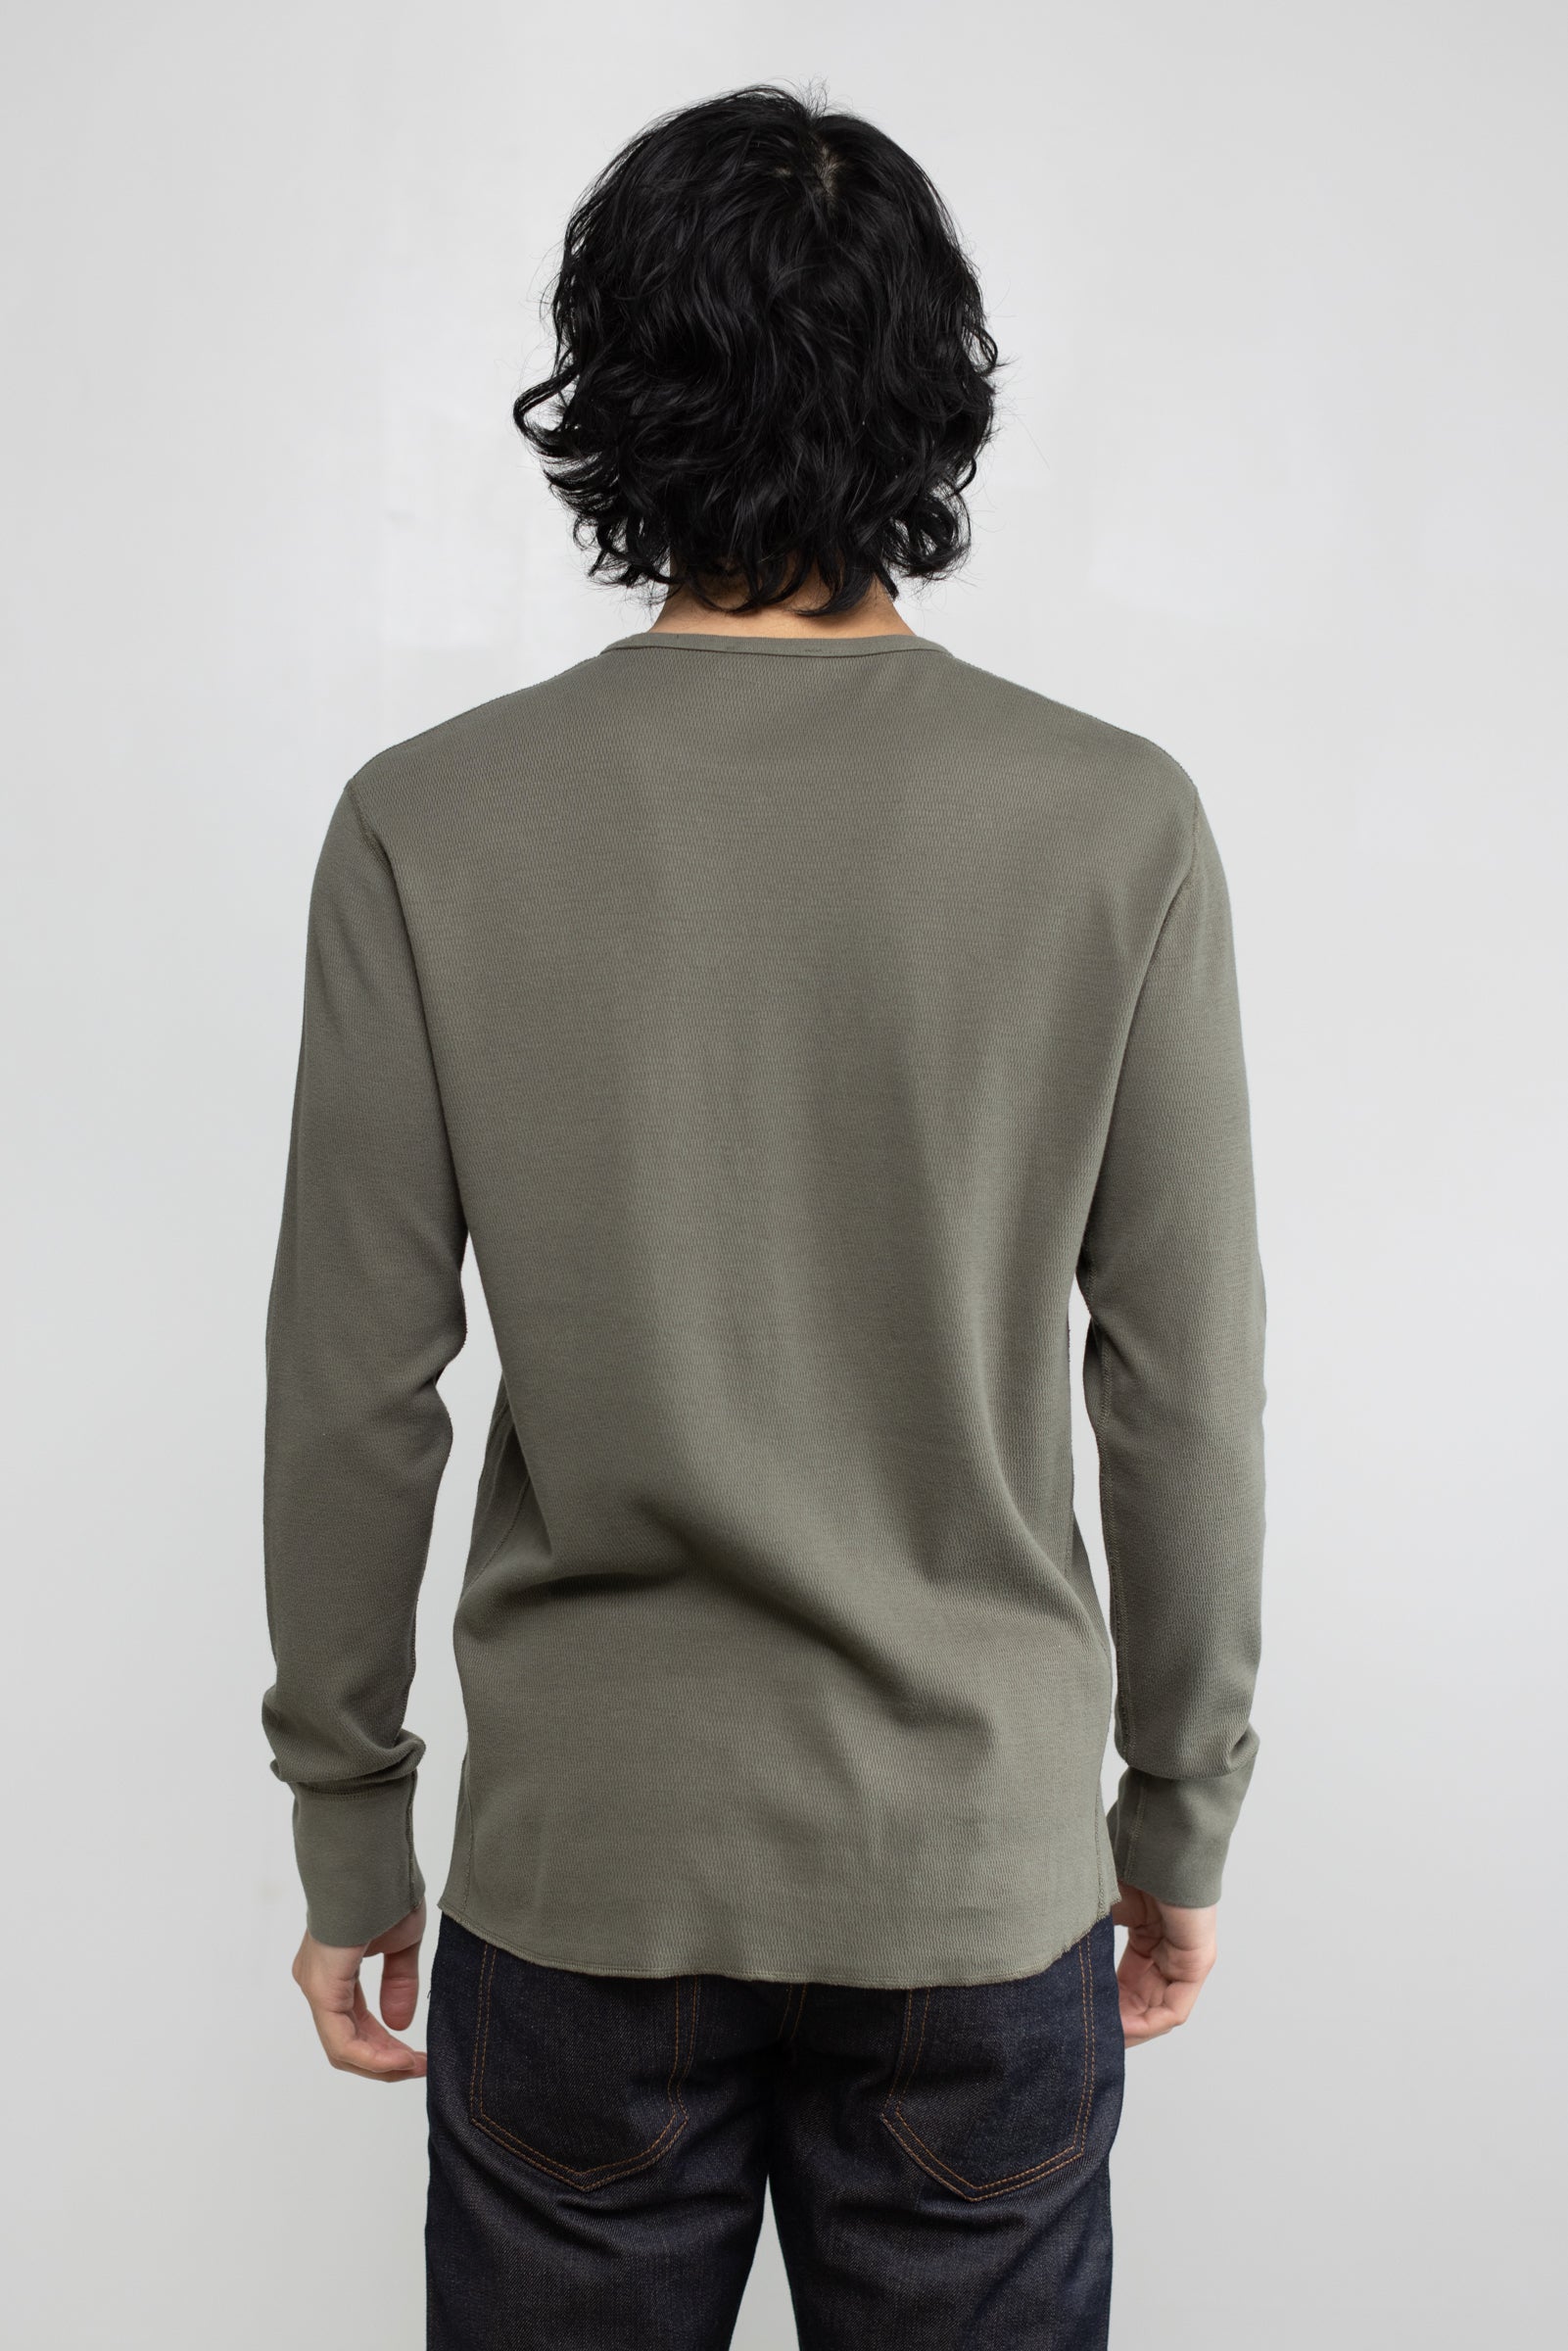 Mesh Thermal L/S Crew in Army Green 03